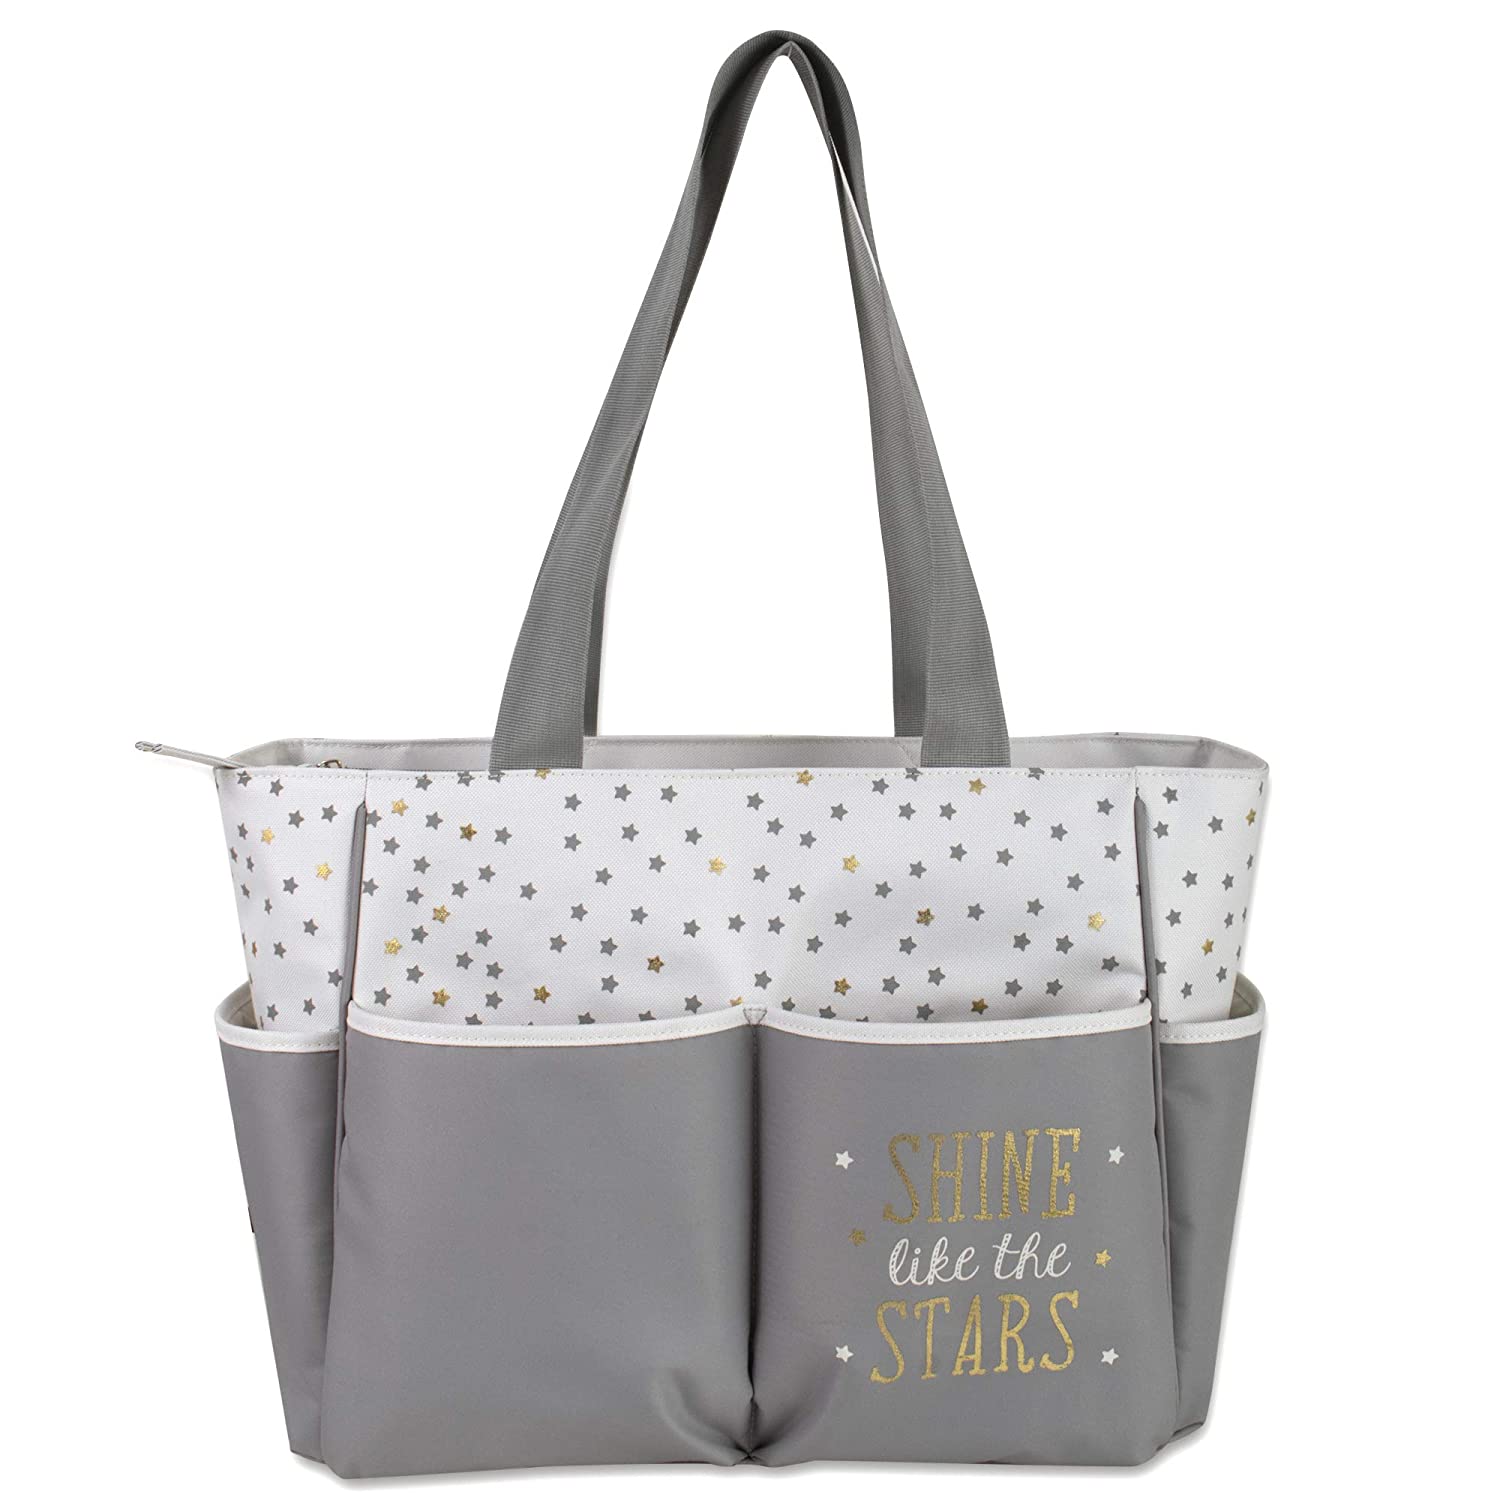 Diaper Bag Tote 5 Piece Set with Sun, Moon, and Stars, Wipes Pocket, Dirty Diaper Pouch, Changing Pad - Grey/Cream